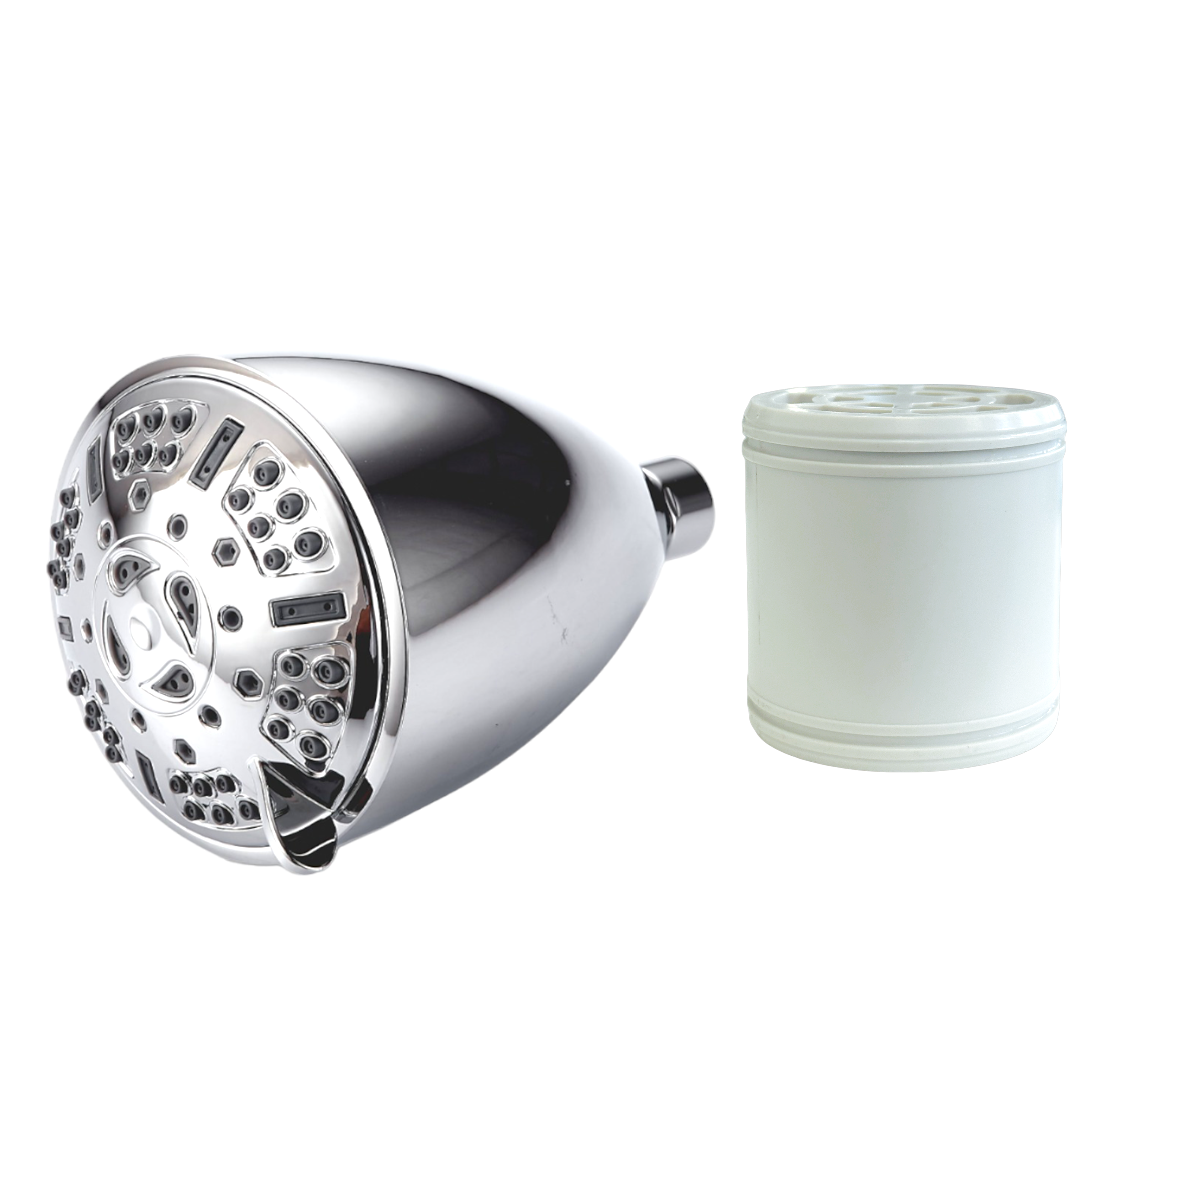 20-Stage Filtration Multi-Mode Ecolux Wall Shower Head